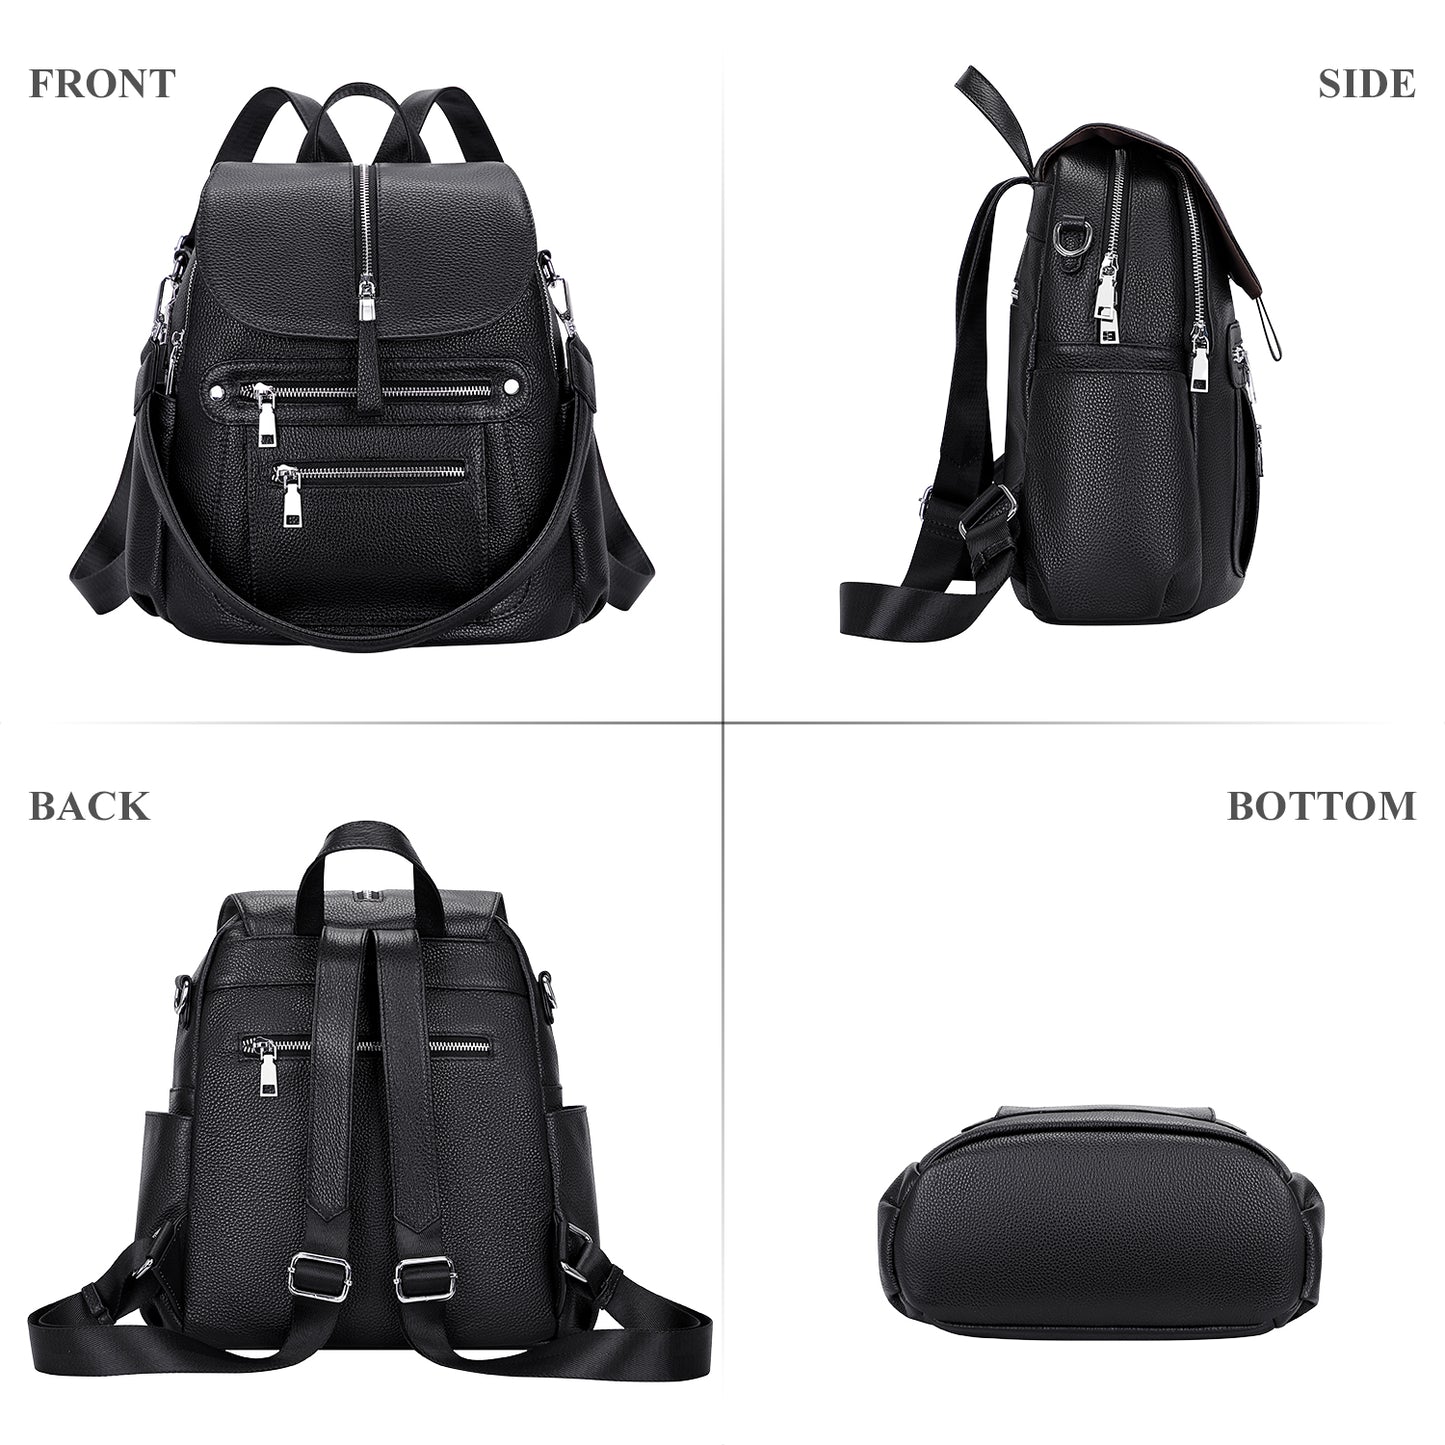 ALTOSY Women Leather Backpack with Flap